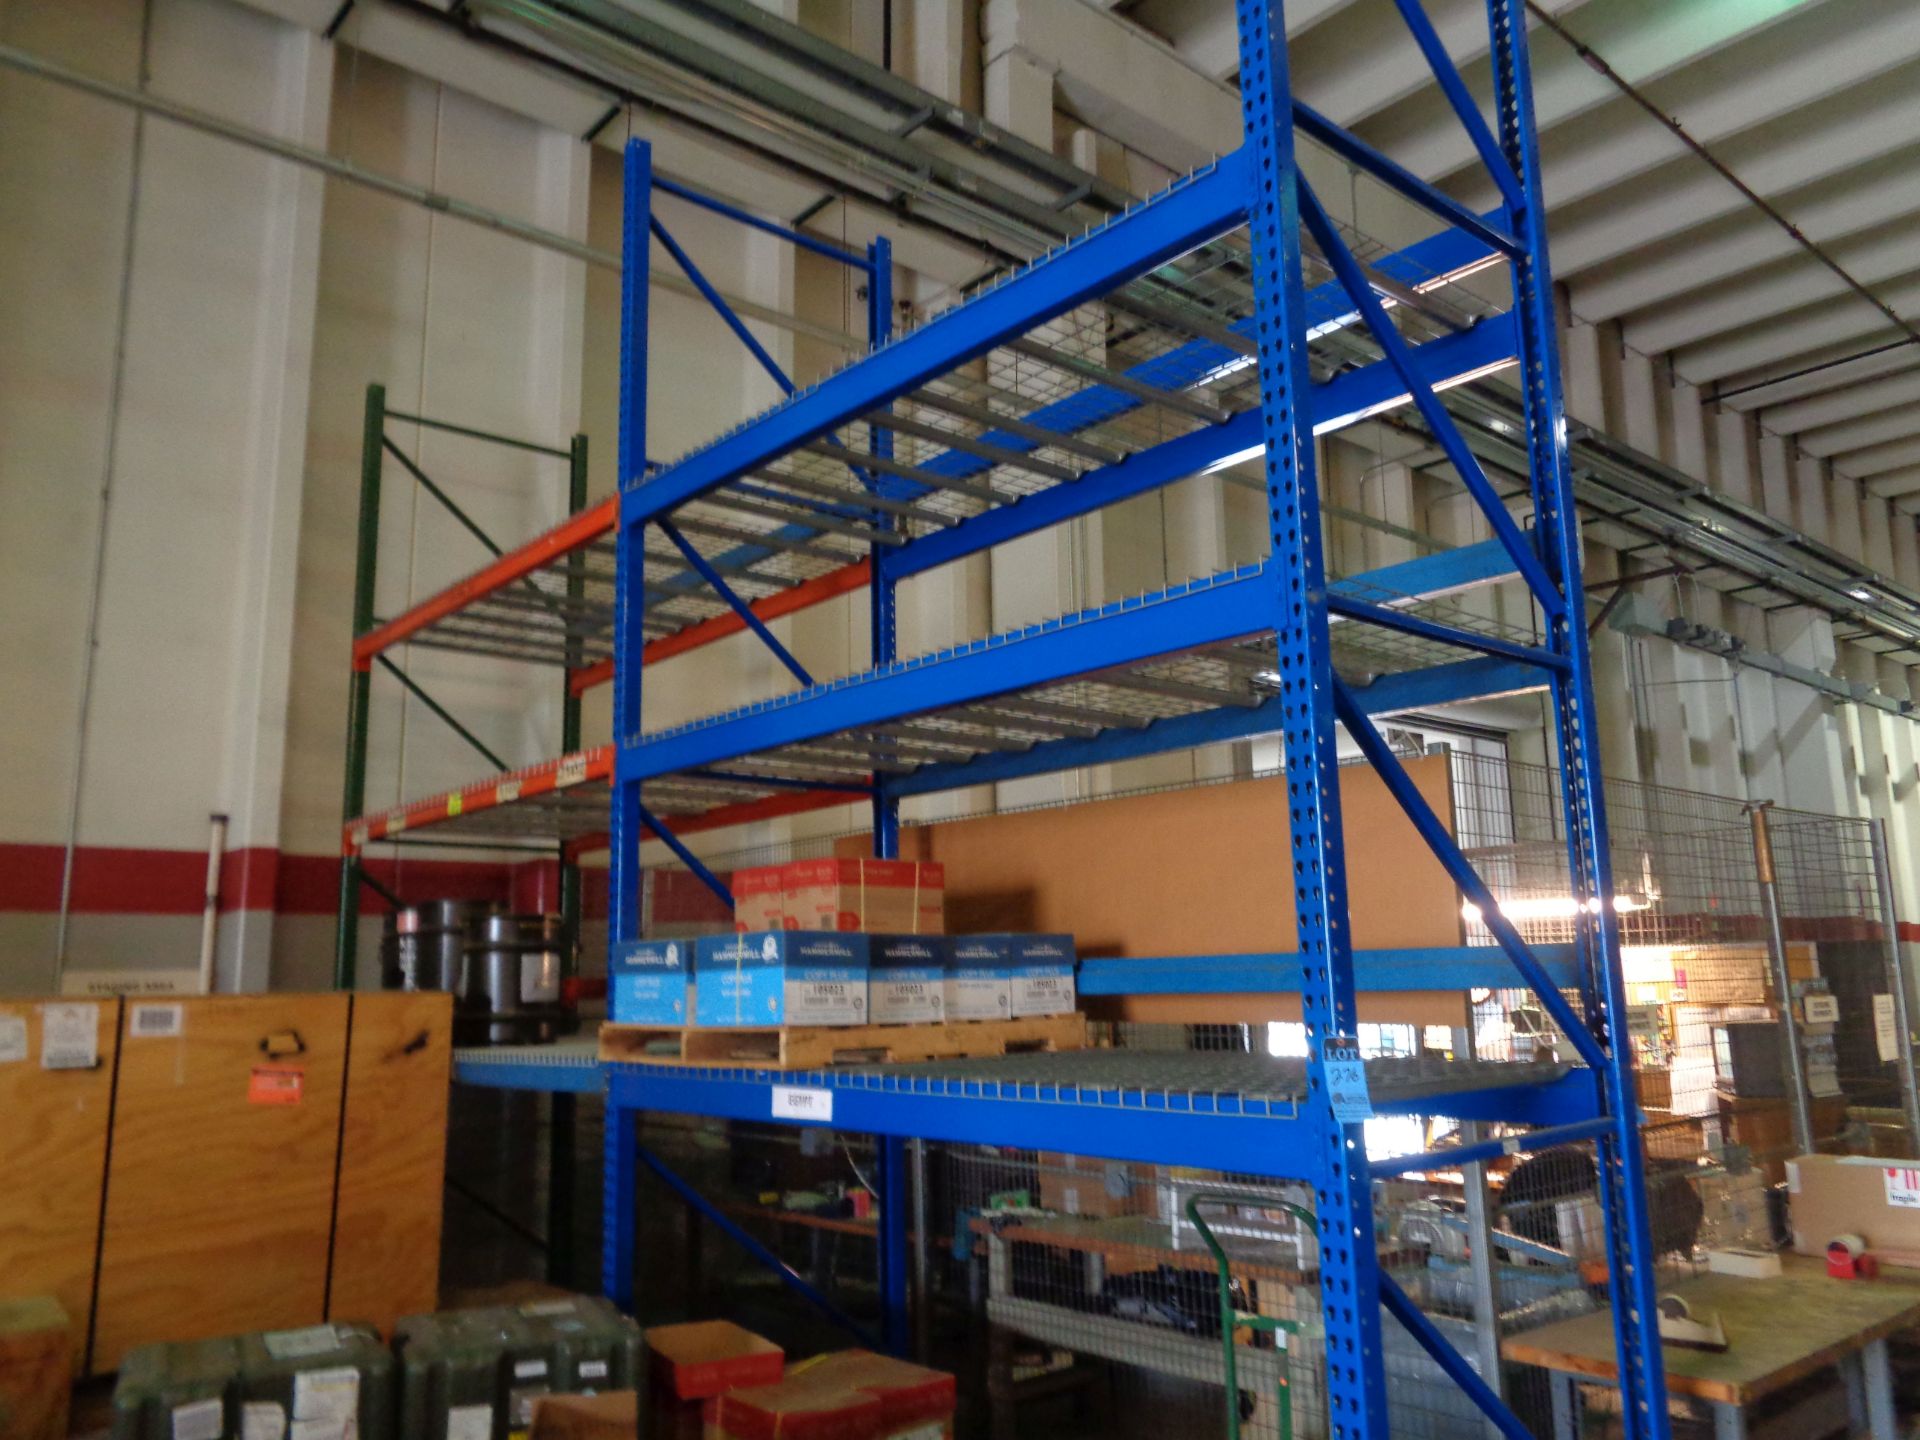 SECTIONS 48" X 108" X 16' HIGH PALLET RACK WITH DECKING **FLOOR BOLTS MUST BE CUT OFF**